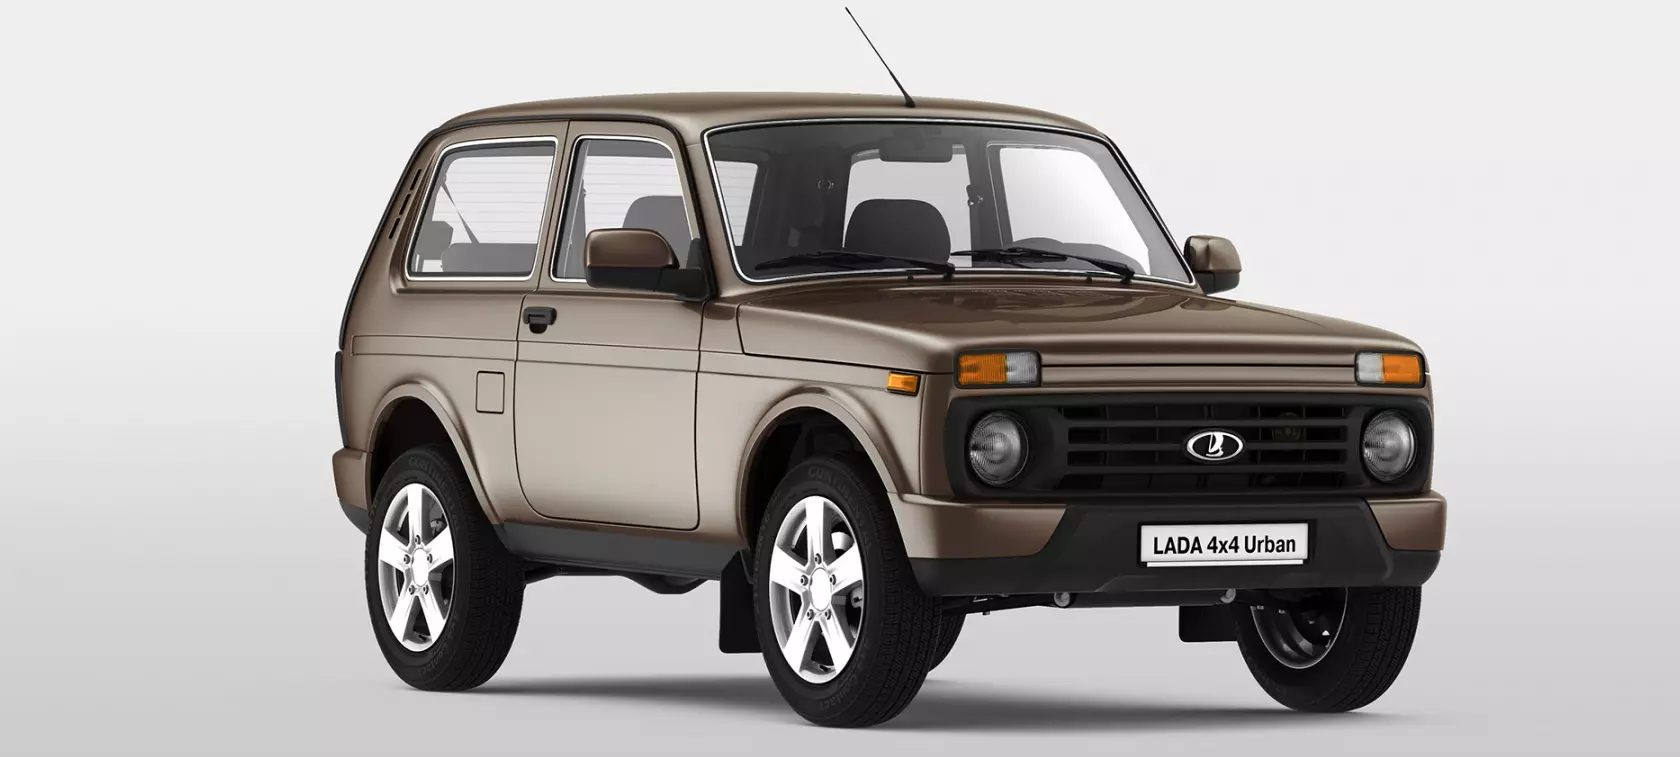 Lada 4x4 Urban LPG - forever young